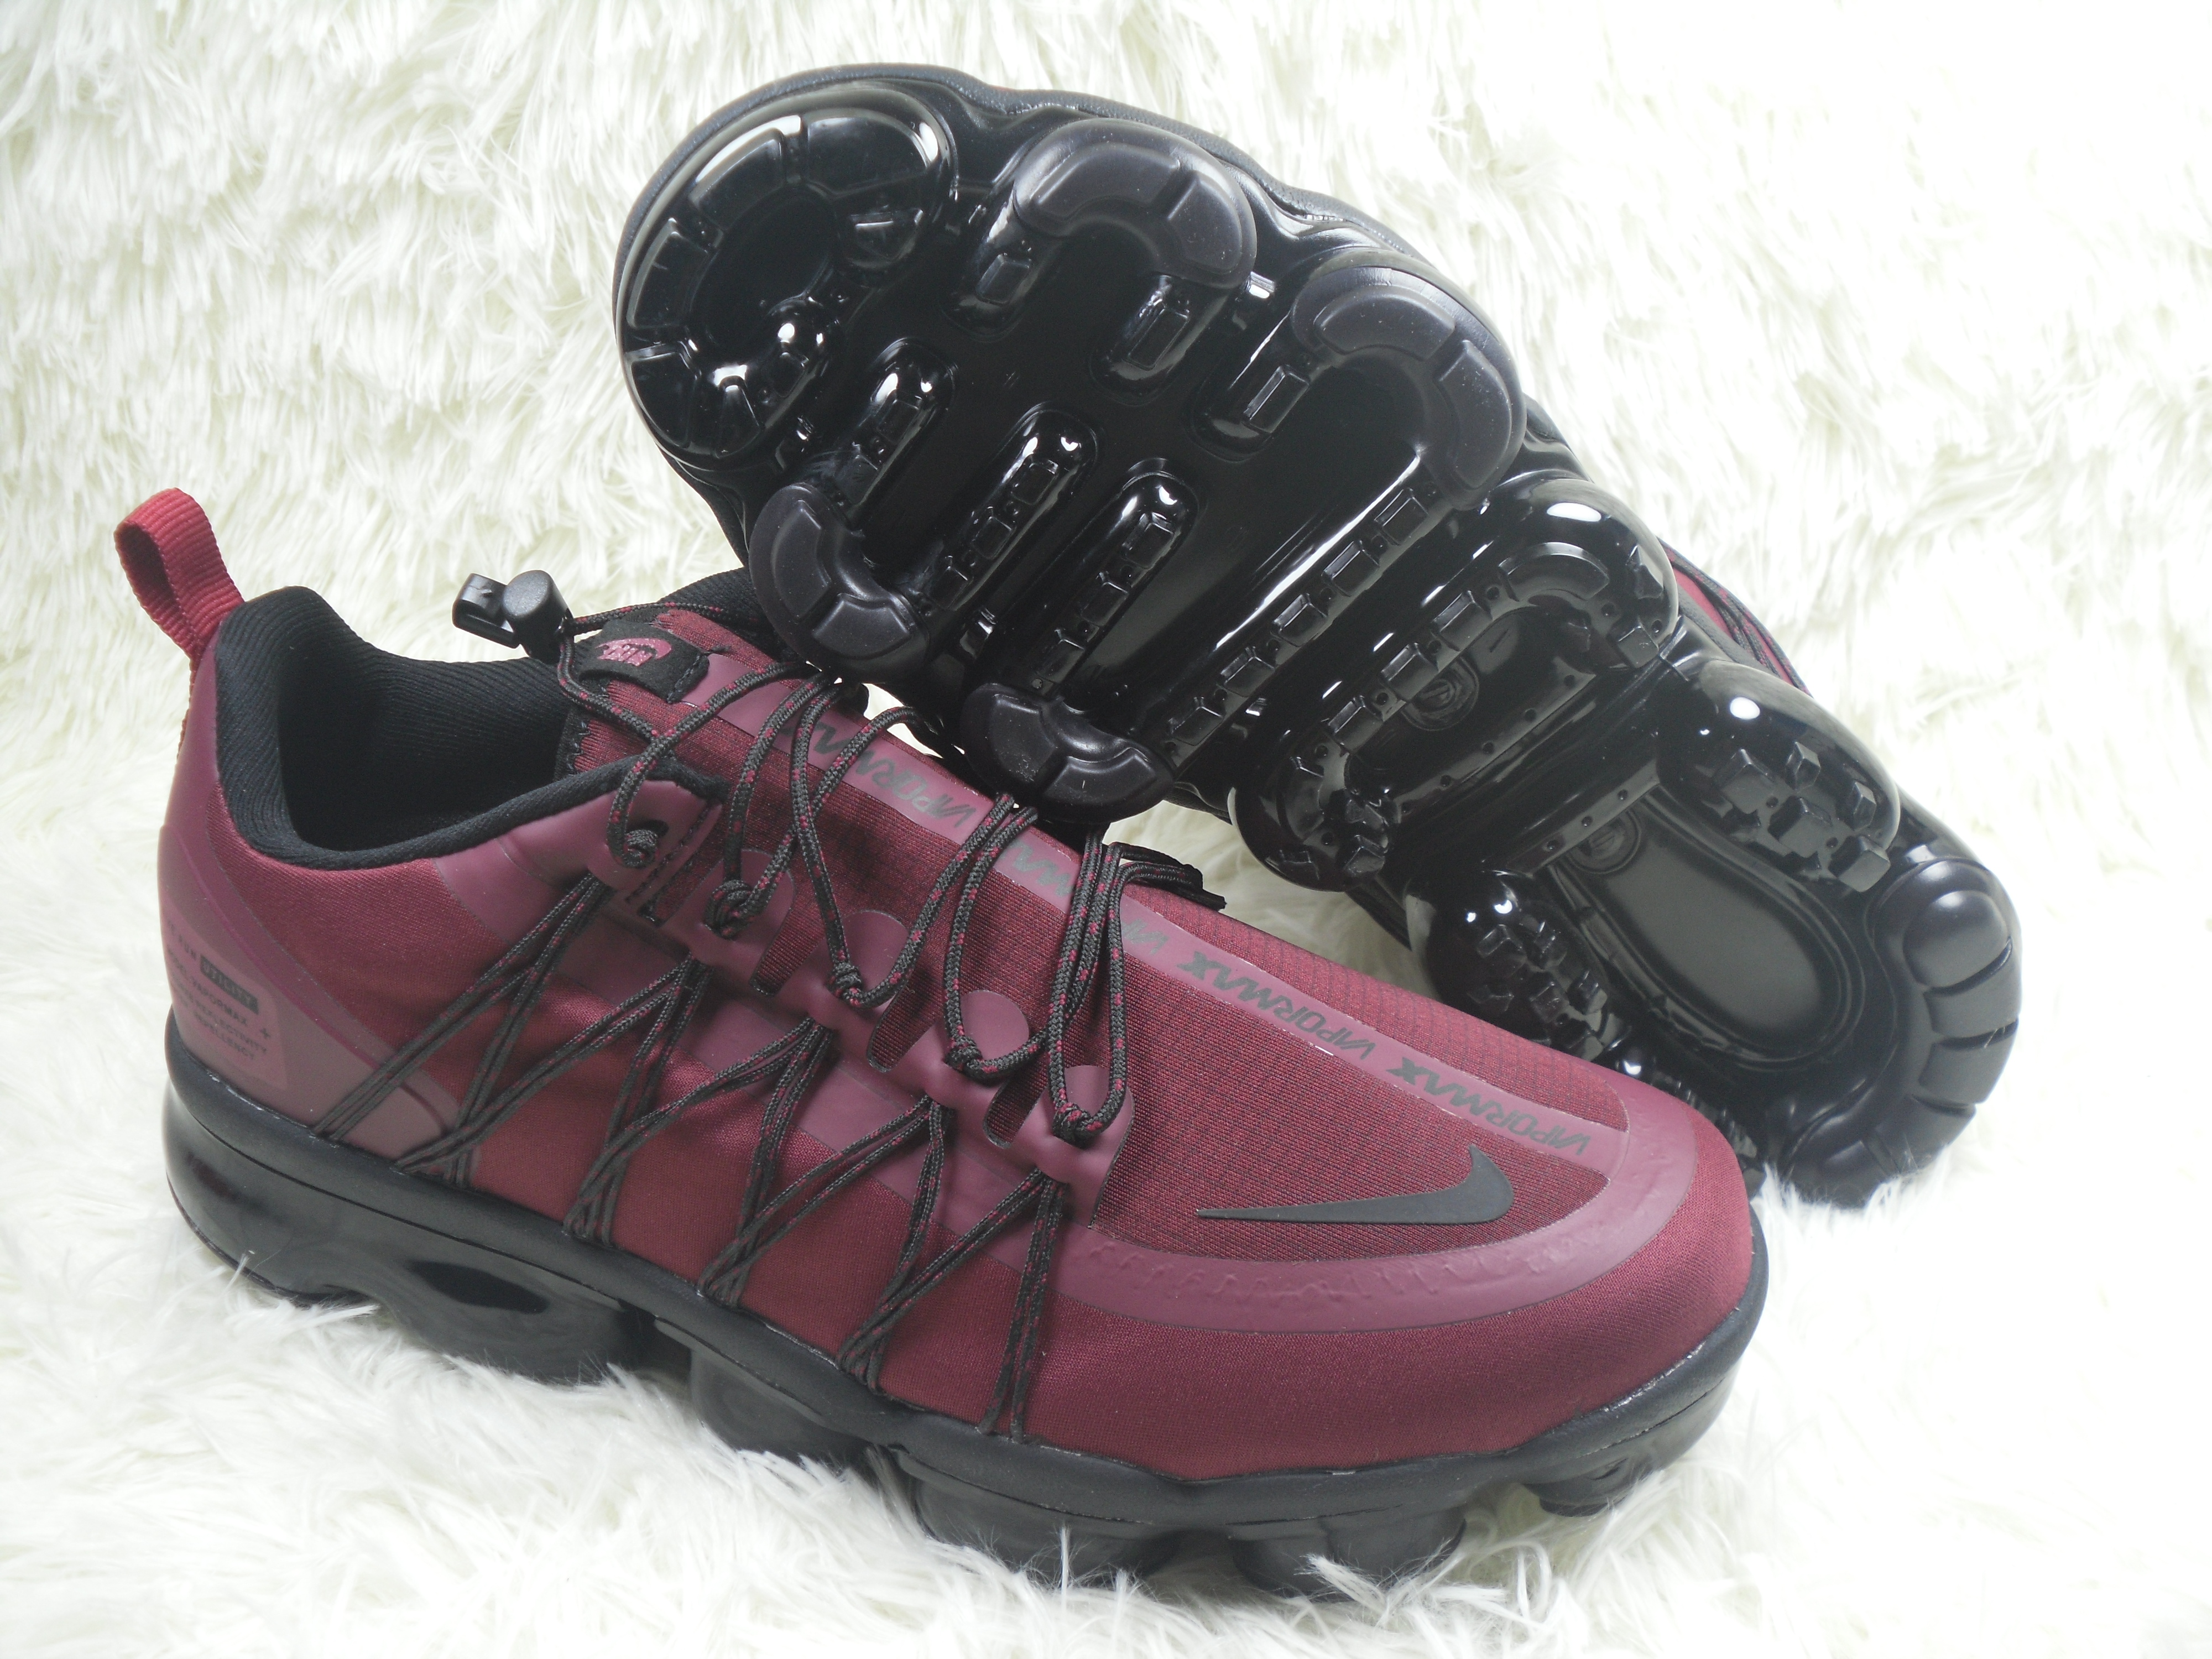 NIKE SP W Air VaporMax Run Utlty Wine Red Black Shoes - Click Image to Close